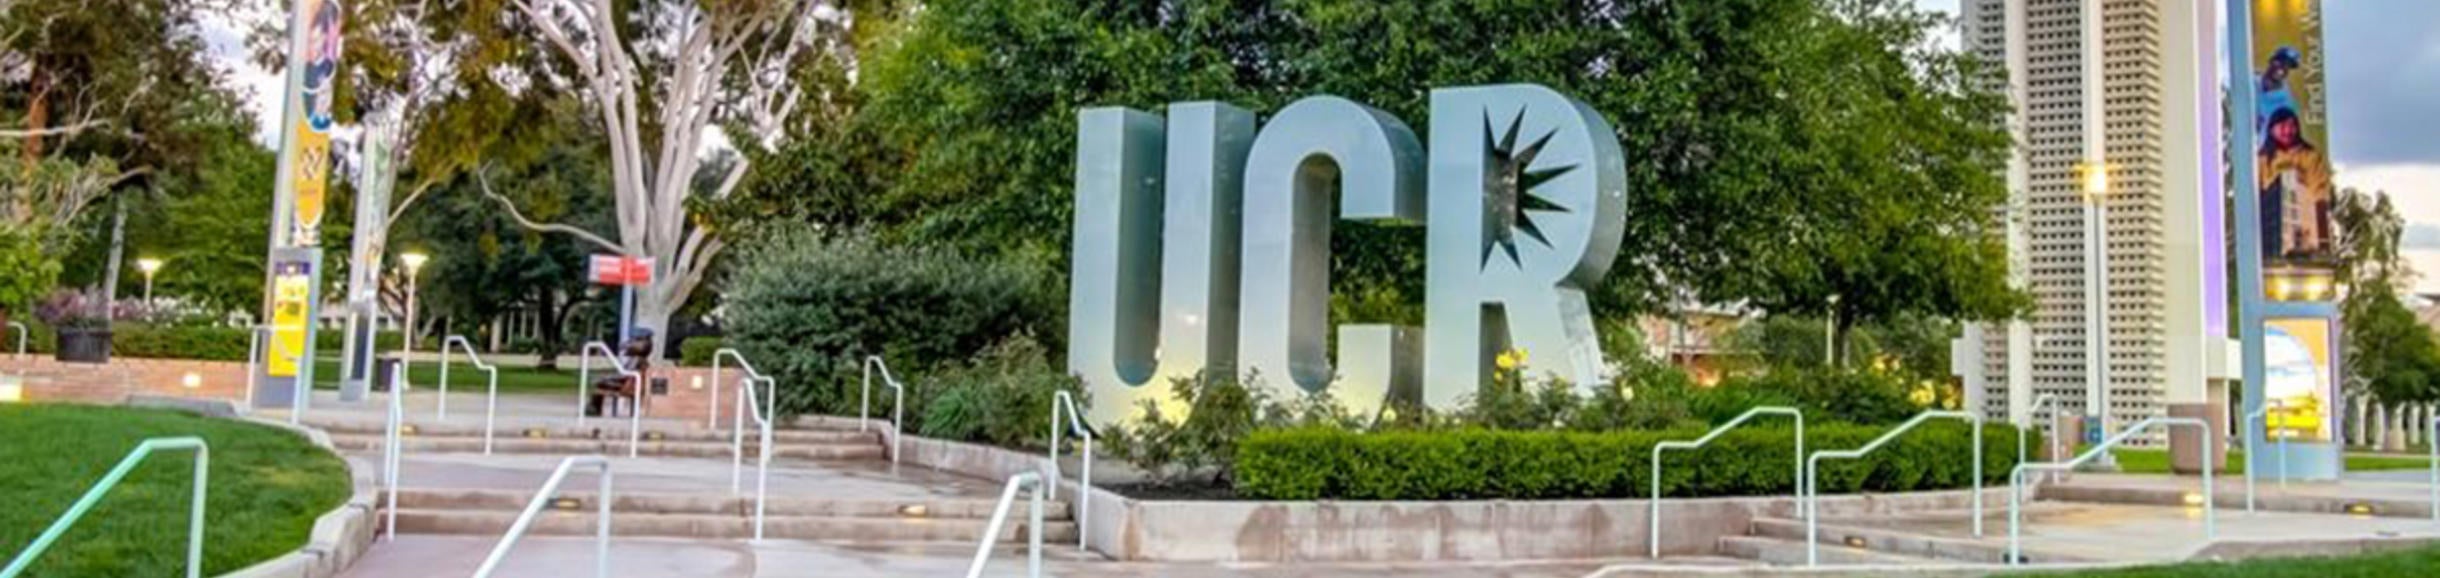 UCR logo monument near bell tower